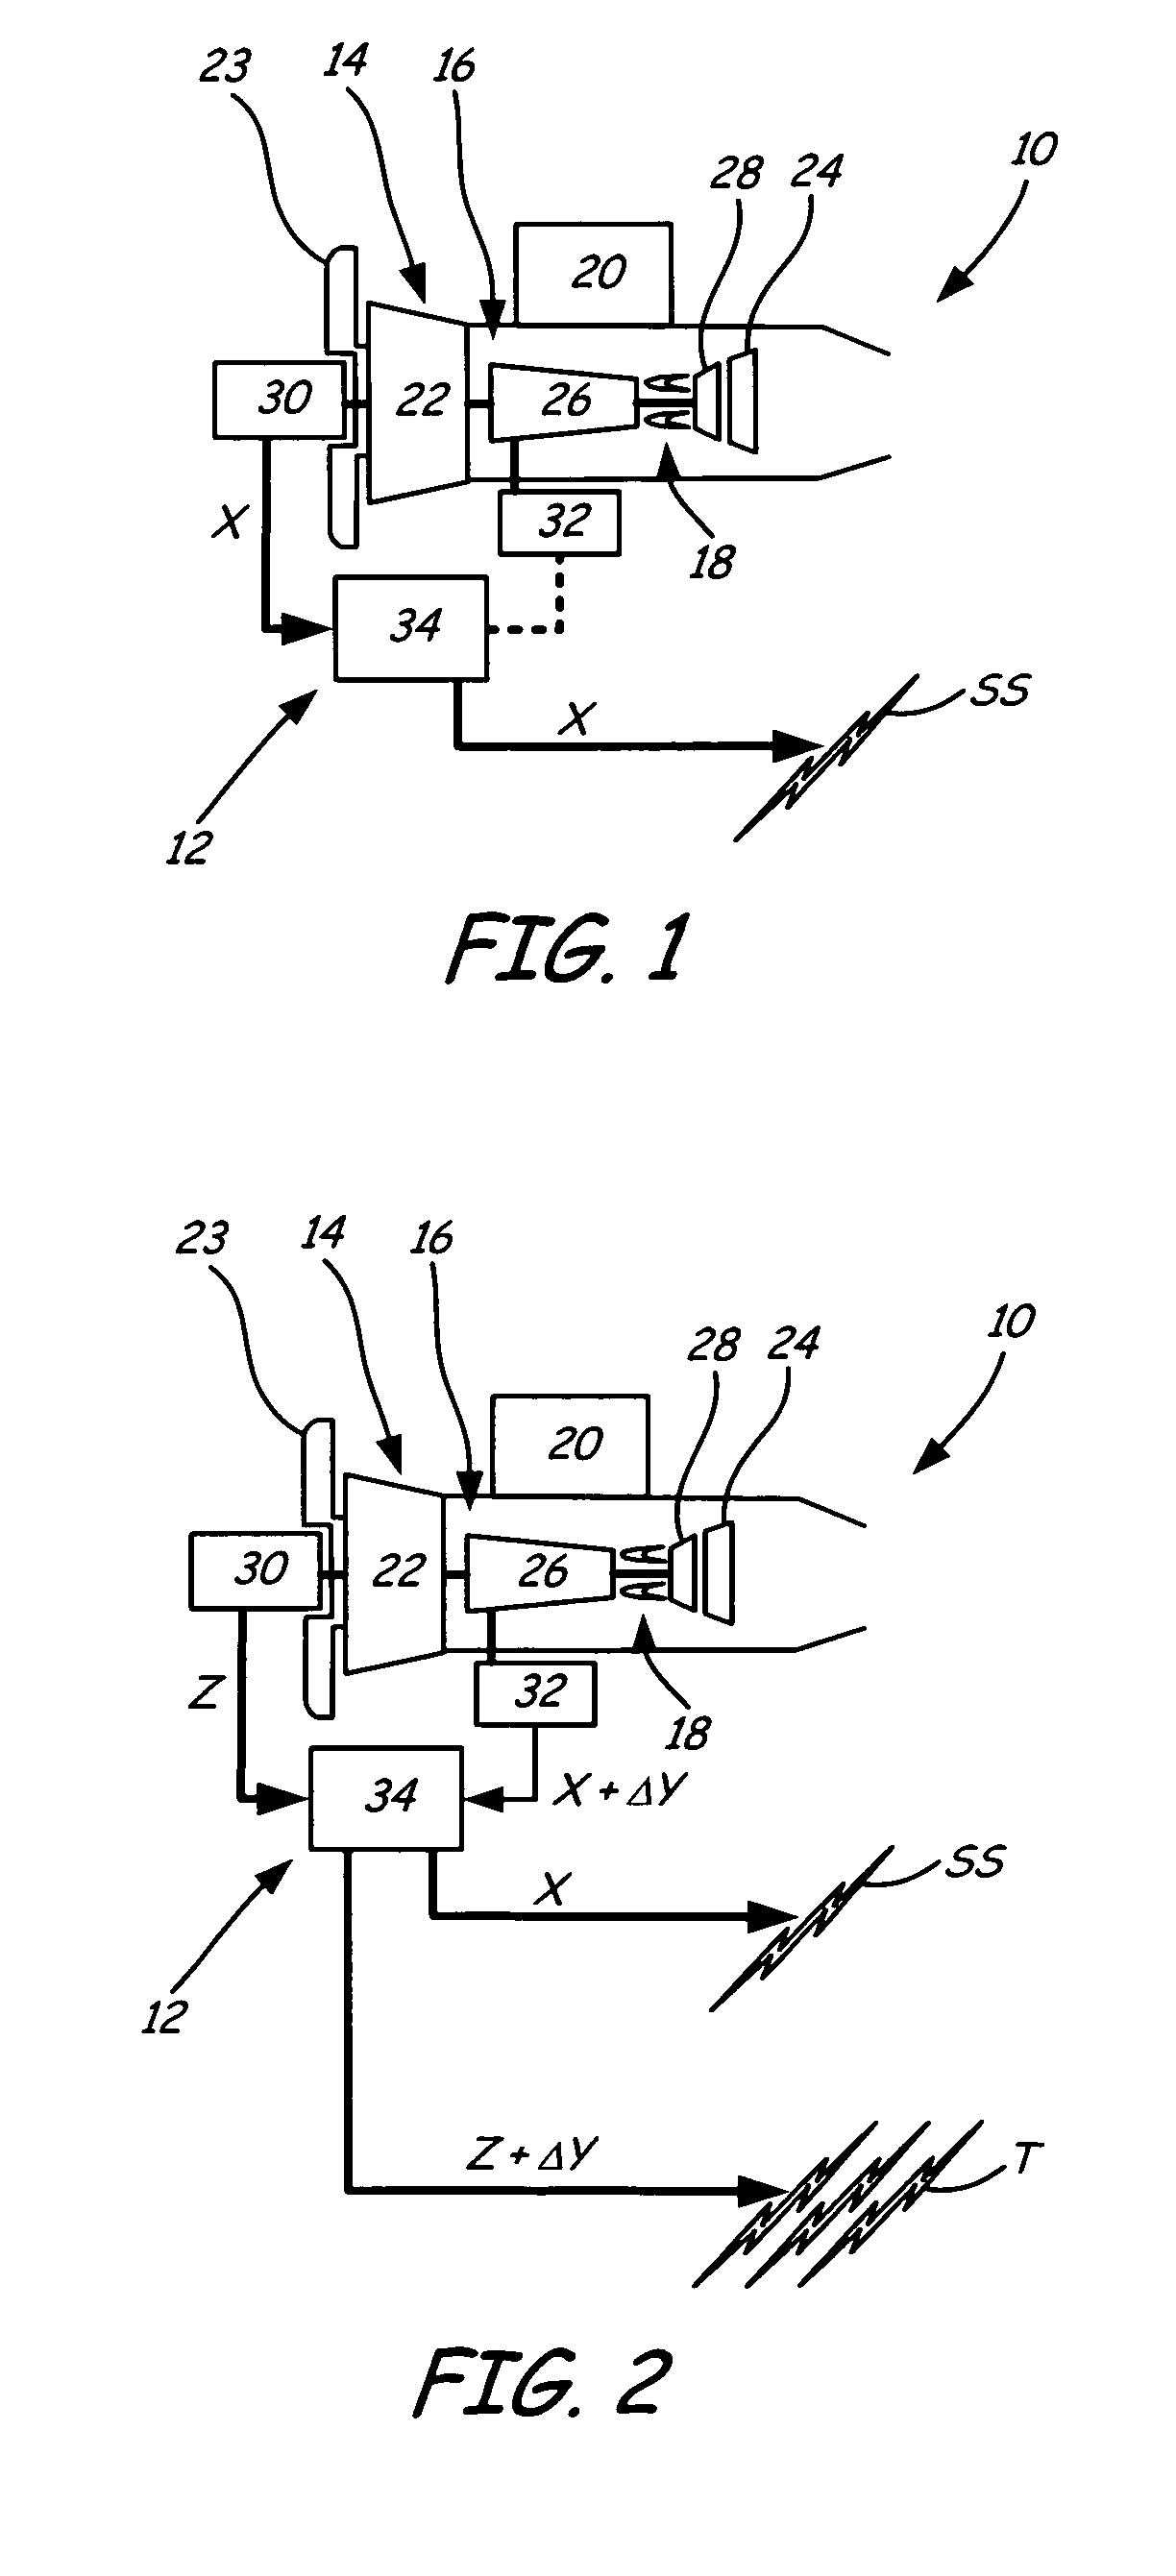 Turbine engine transient power extraction system and method